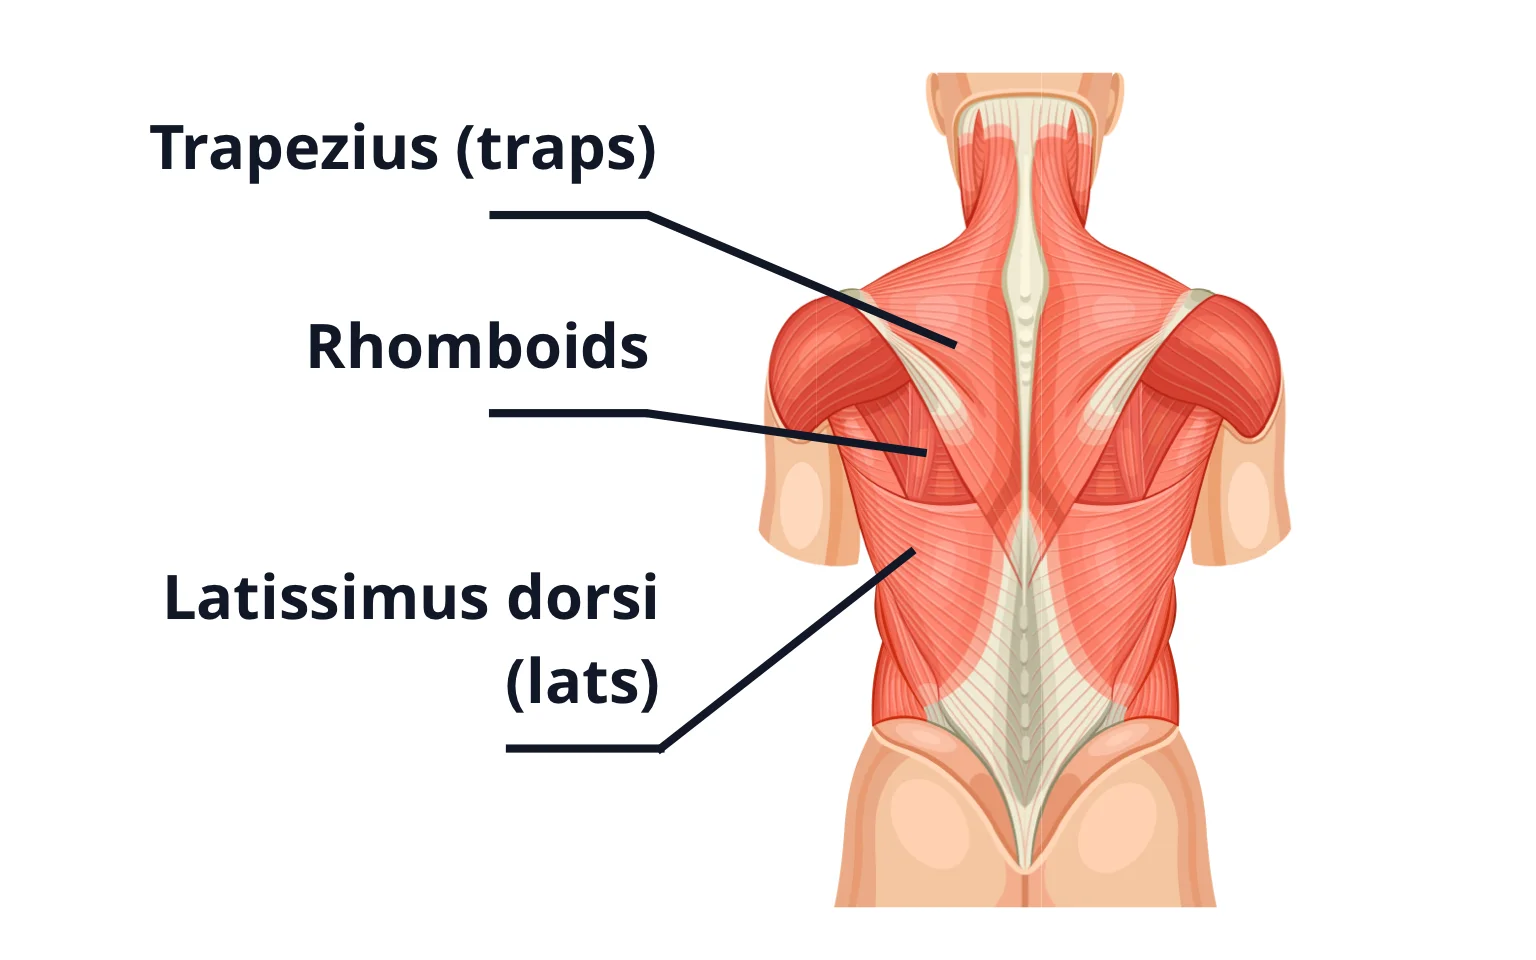 Diagram showing the position of the latissimus dorsi (lats), rhomboids and trapezius (traps) muscles